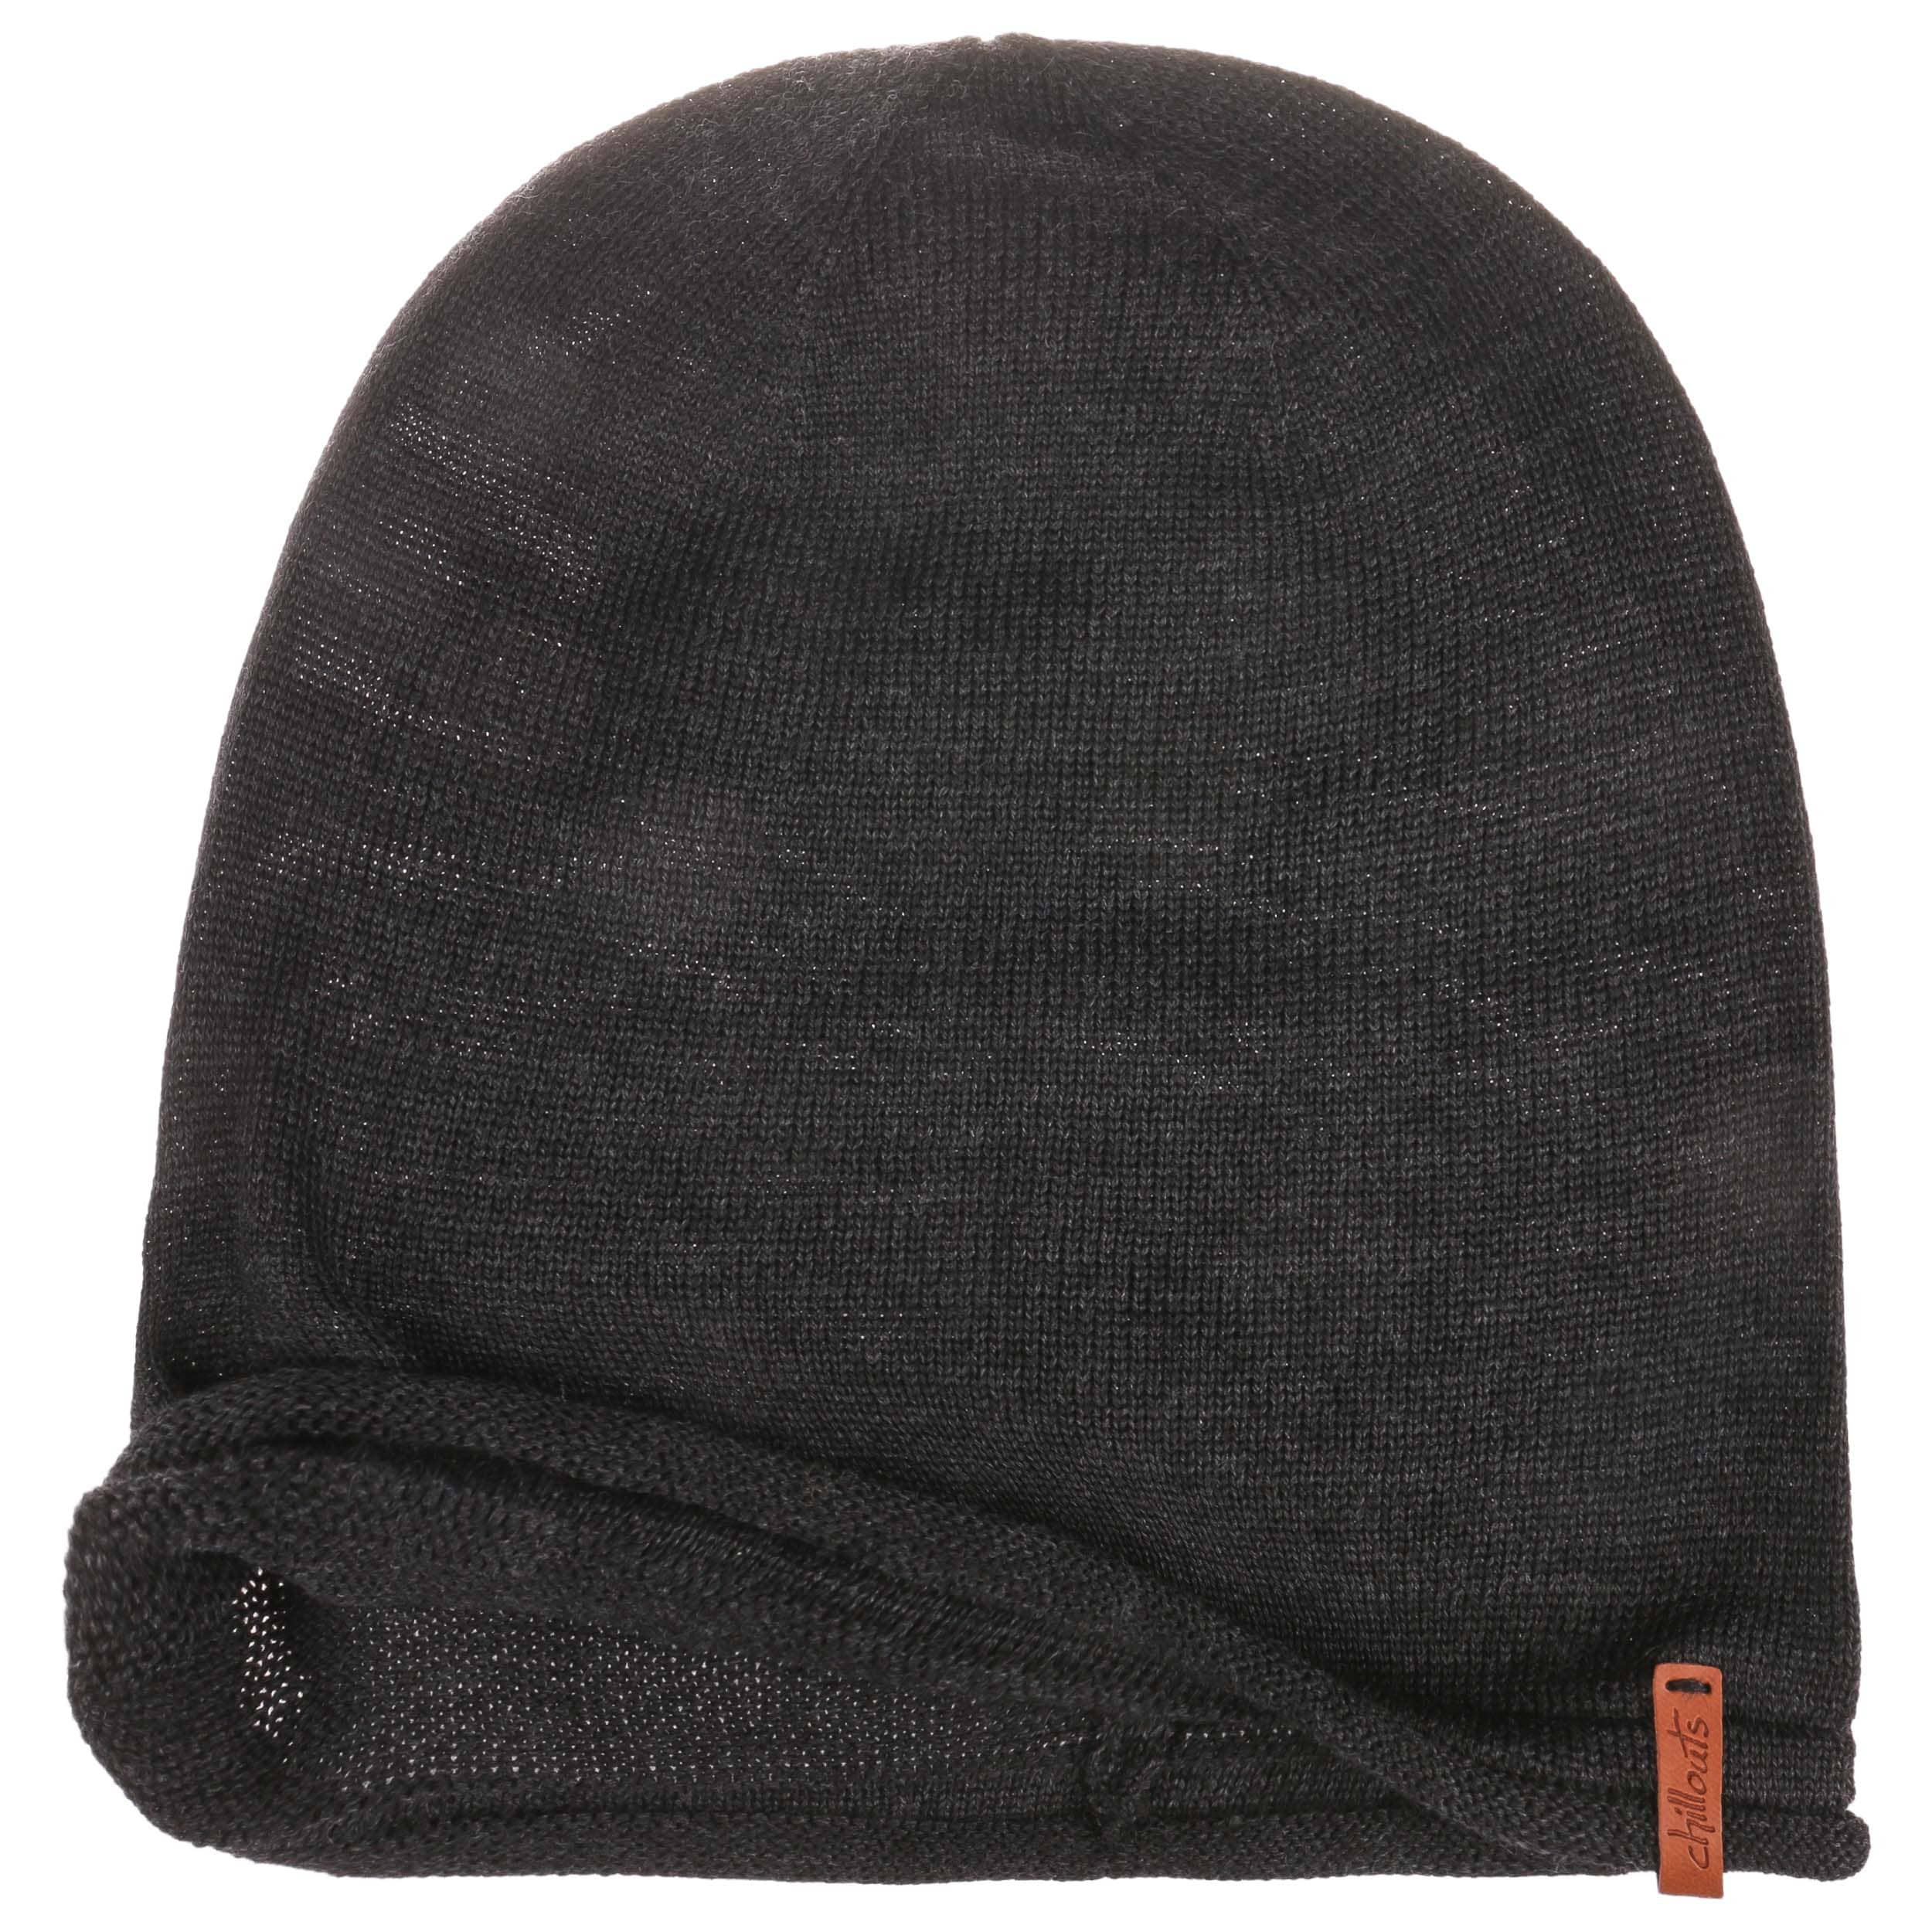 Beanie Chillouts - Leicester Oversize 29,95 € by